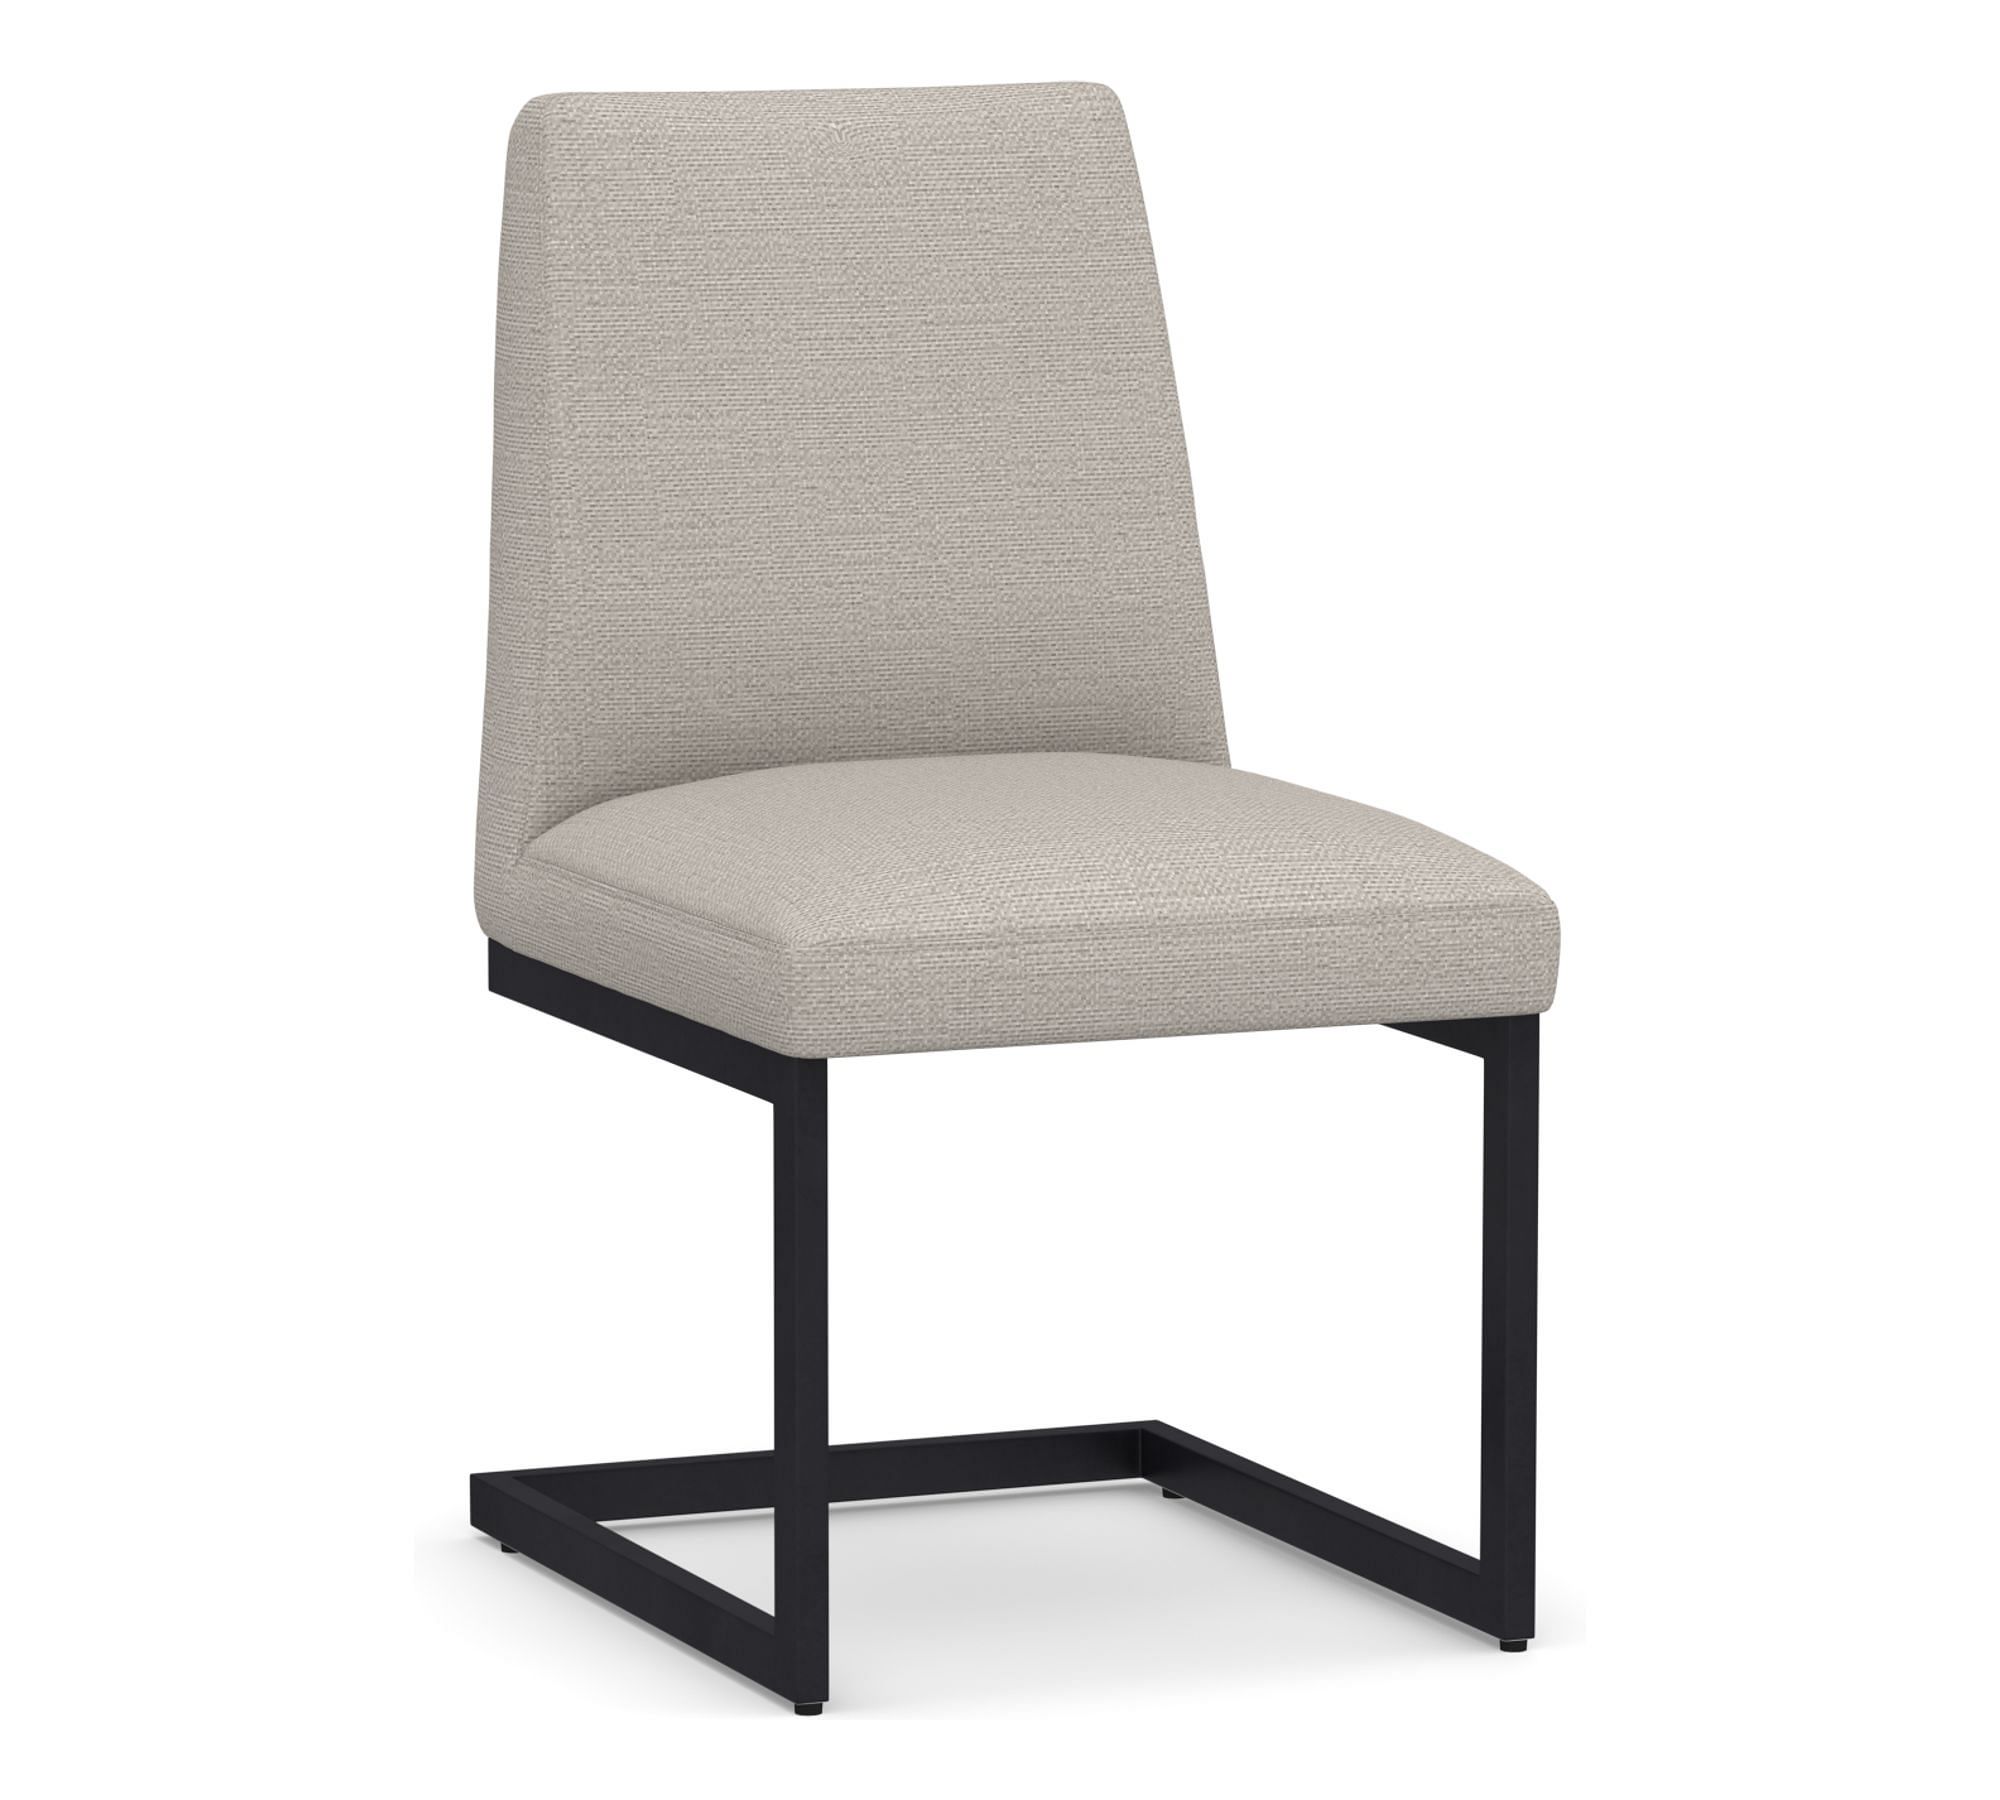 Classic Upholstered Metal Cantilever Dining Chair